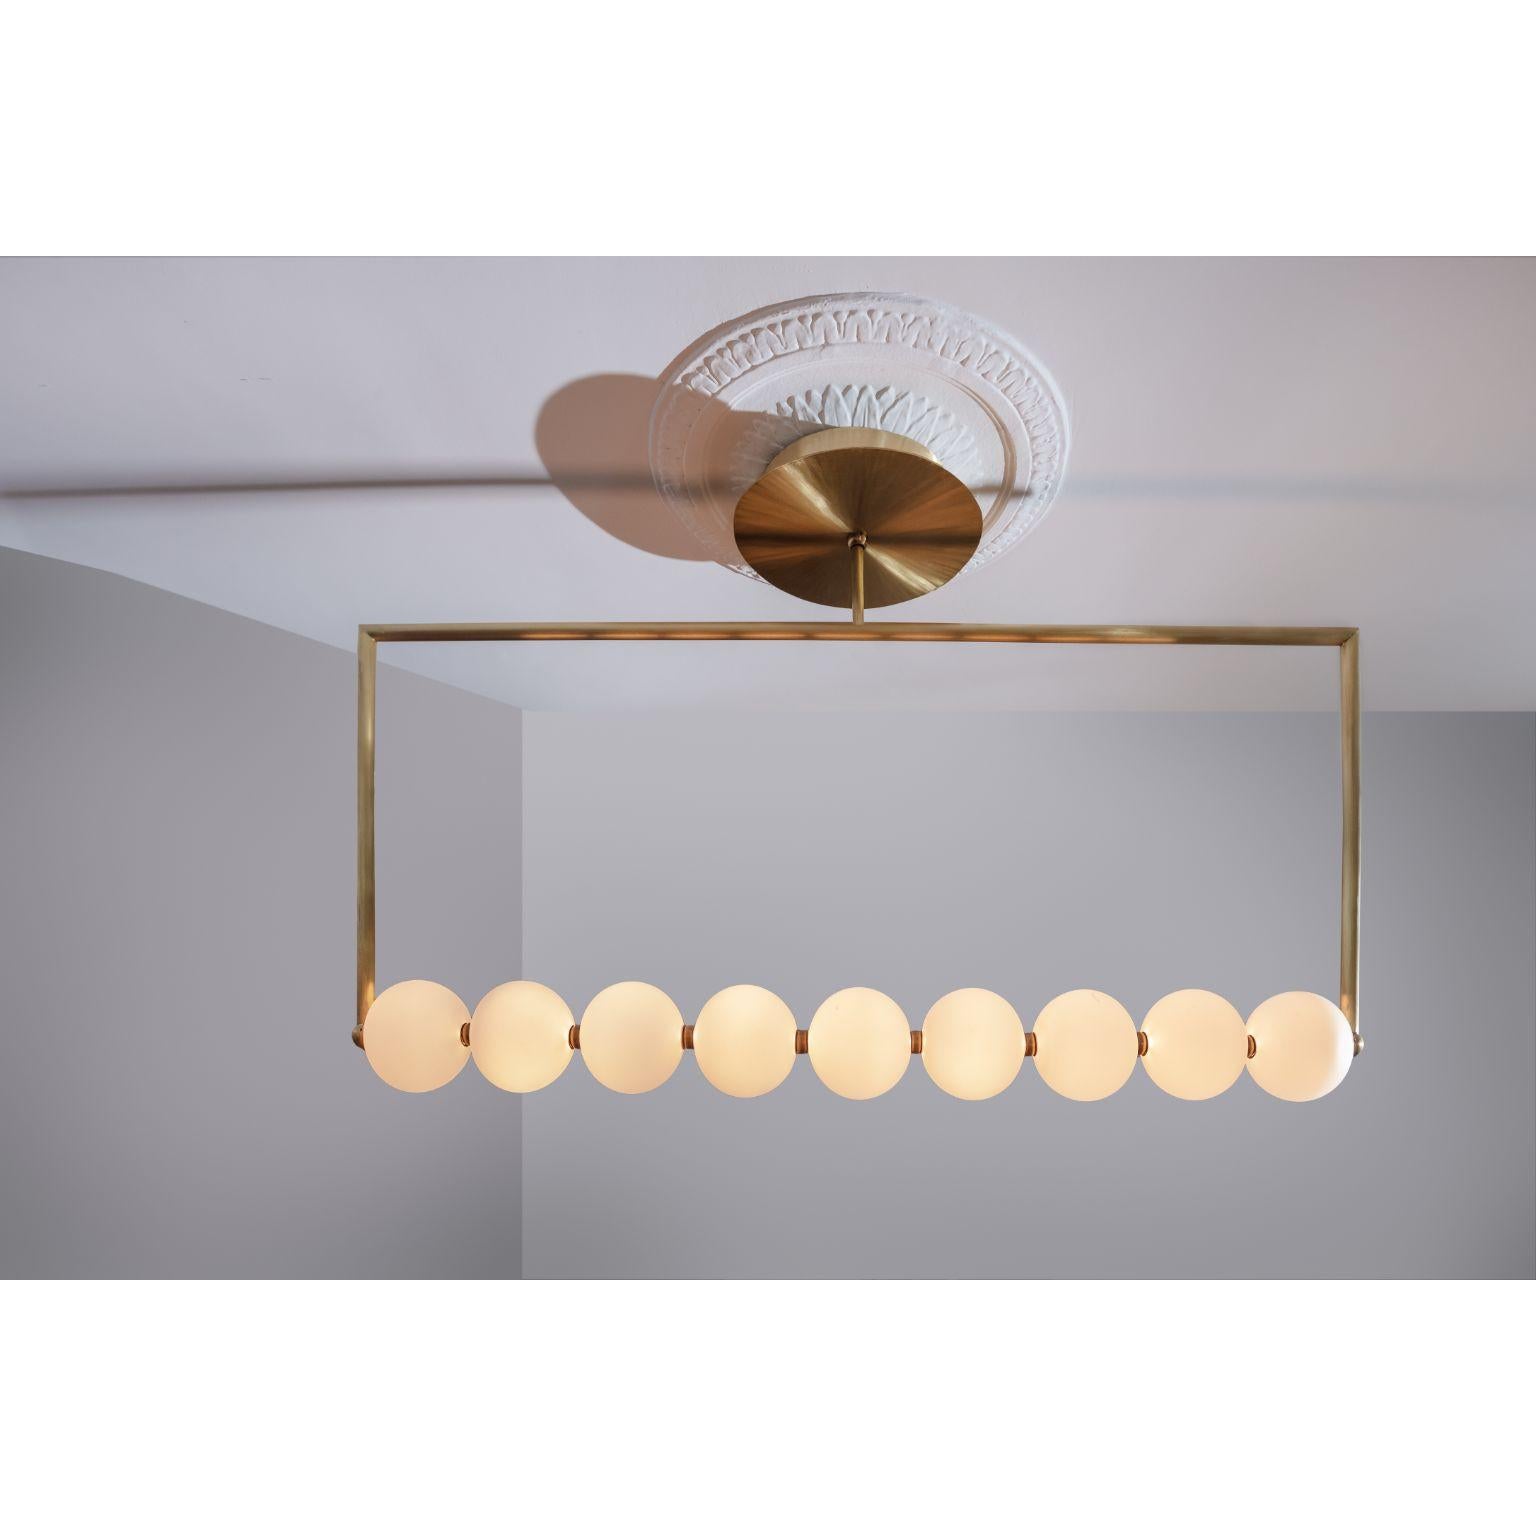 The Pearl Line by Ludovic Clément d'Armont
Materials: Blown glass, brass joints, LEDs
Dimensions: D 12 x W 122 x H 67 cm

The Pearl line is a simple architectural element that helps structure a space. 
Depending on the shape you choose, it is